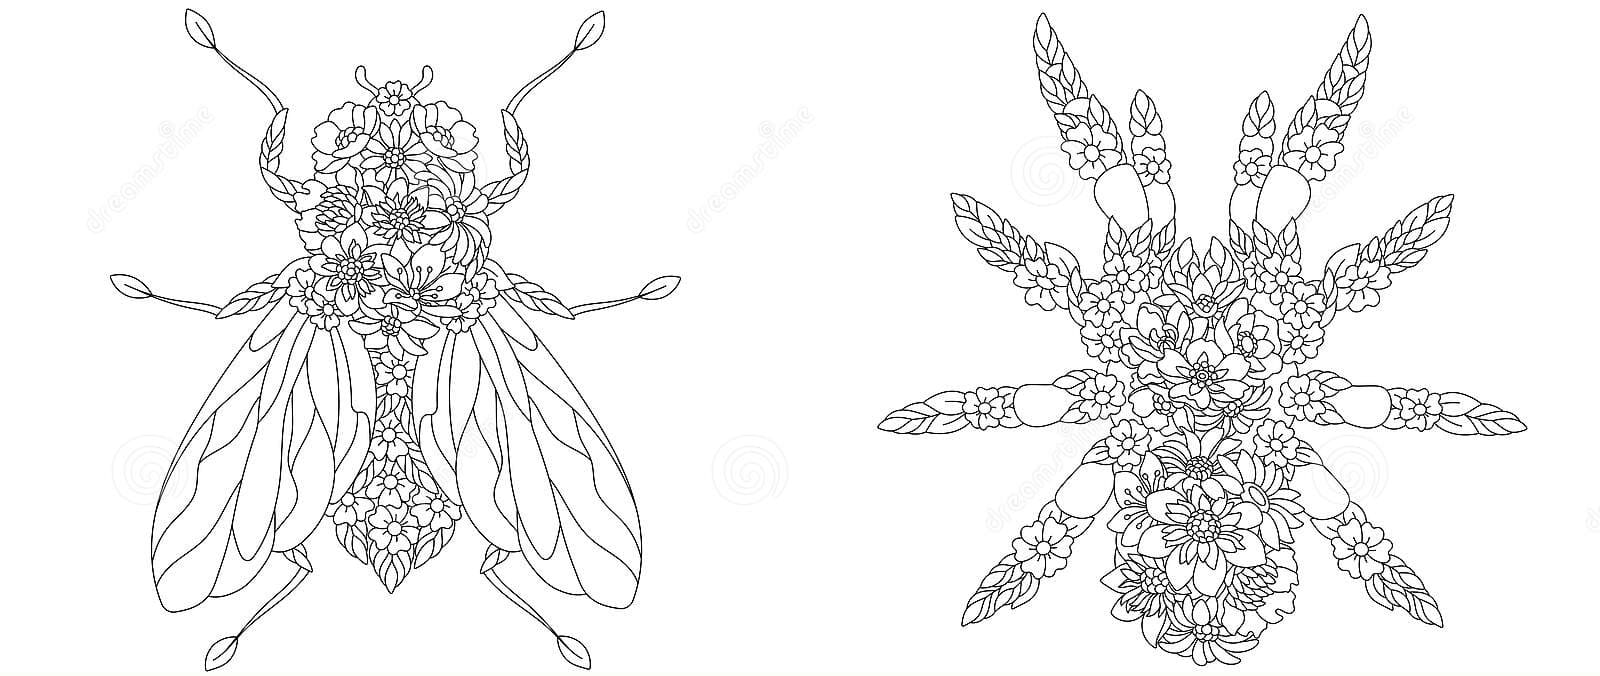 Fly And Spider Image Coloring Page